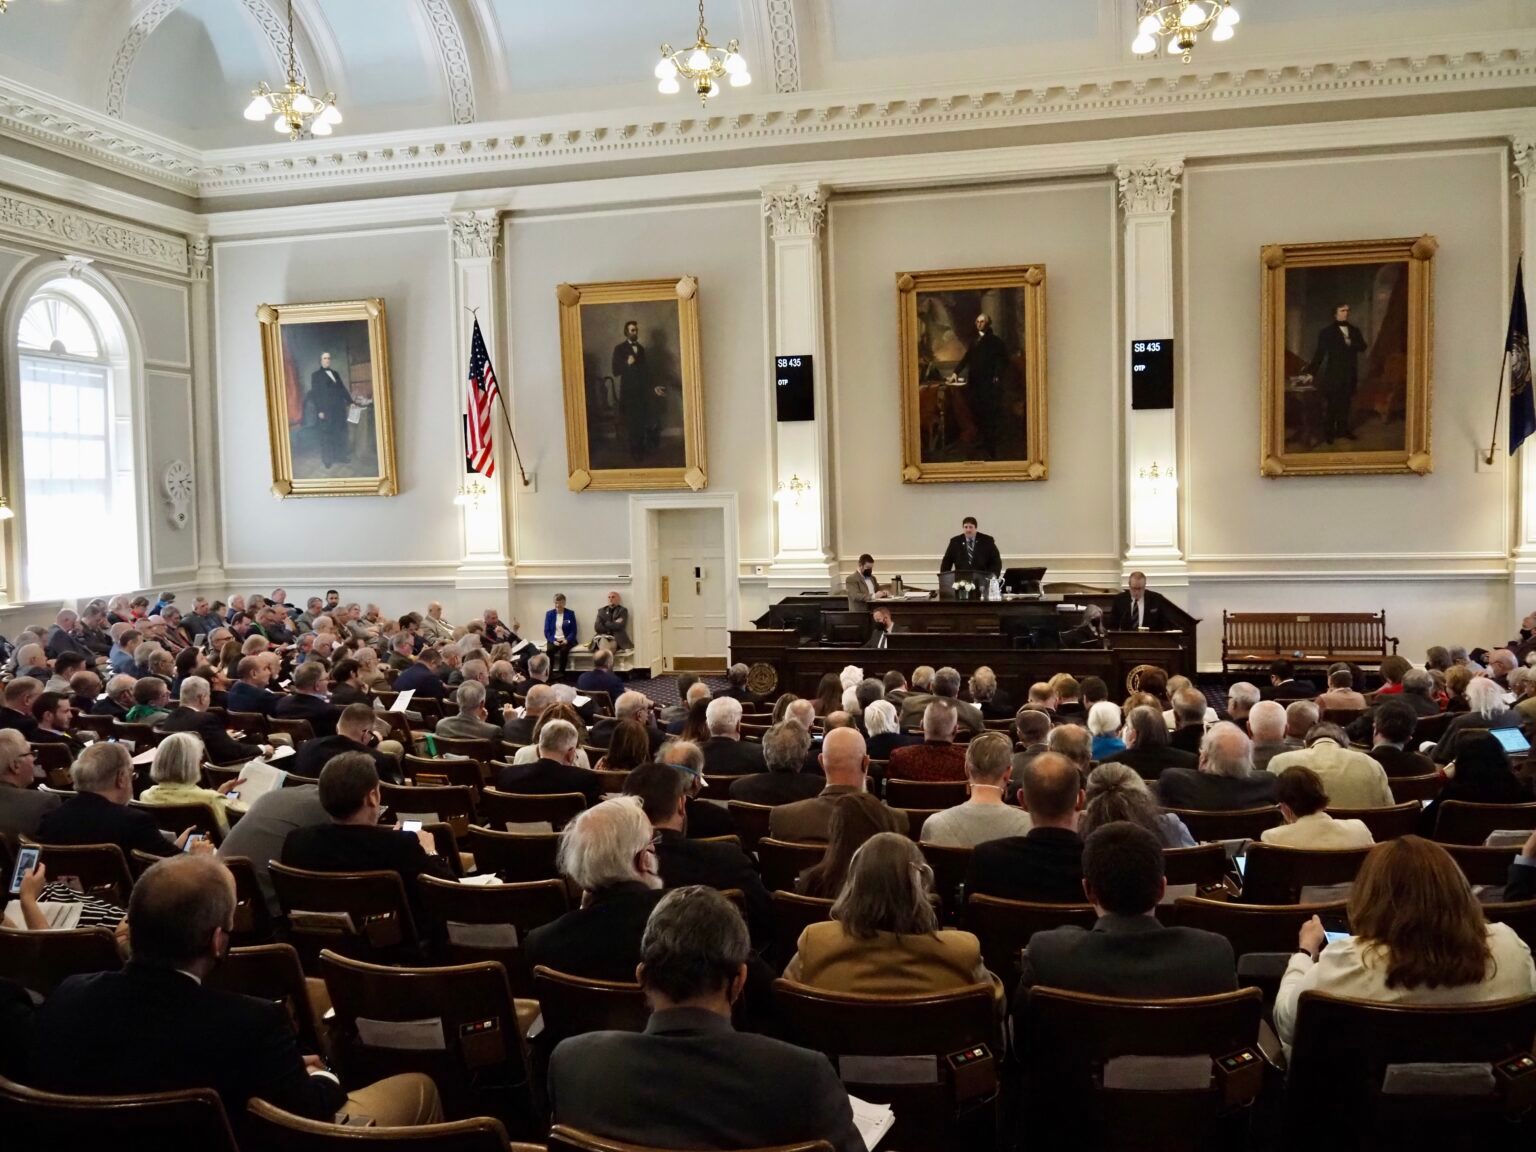 Looking into attendance records for NH lawmakers? Details matter.